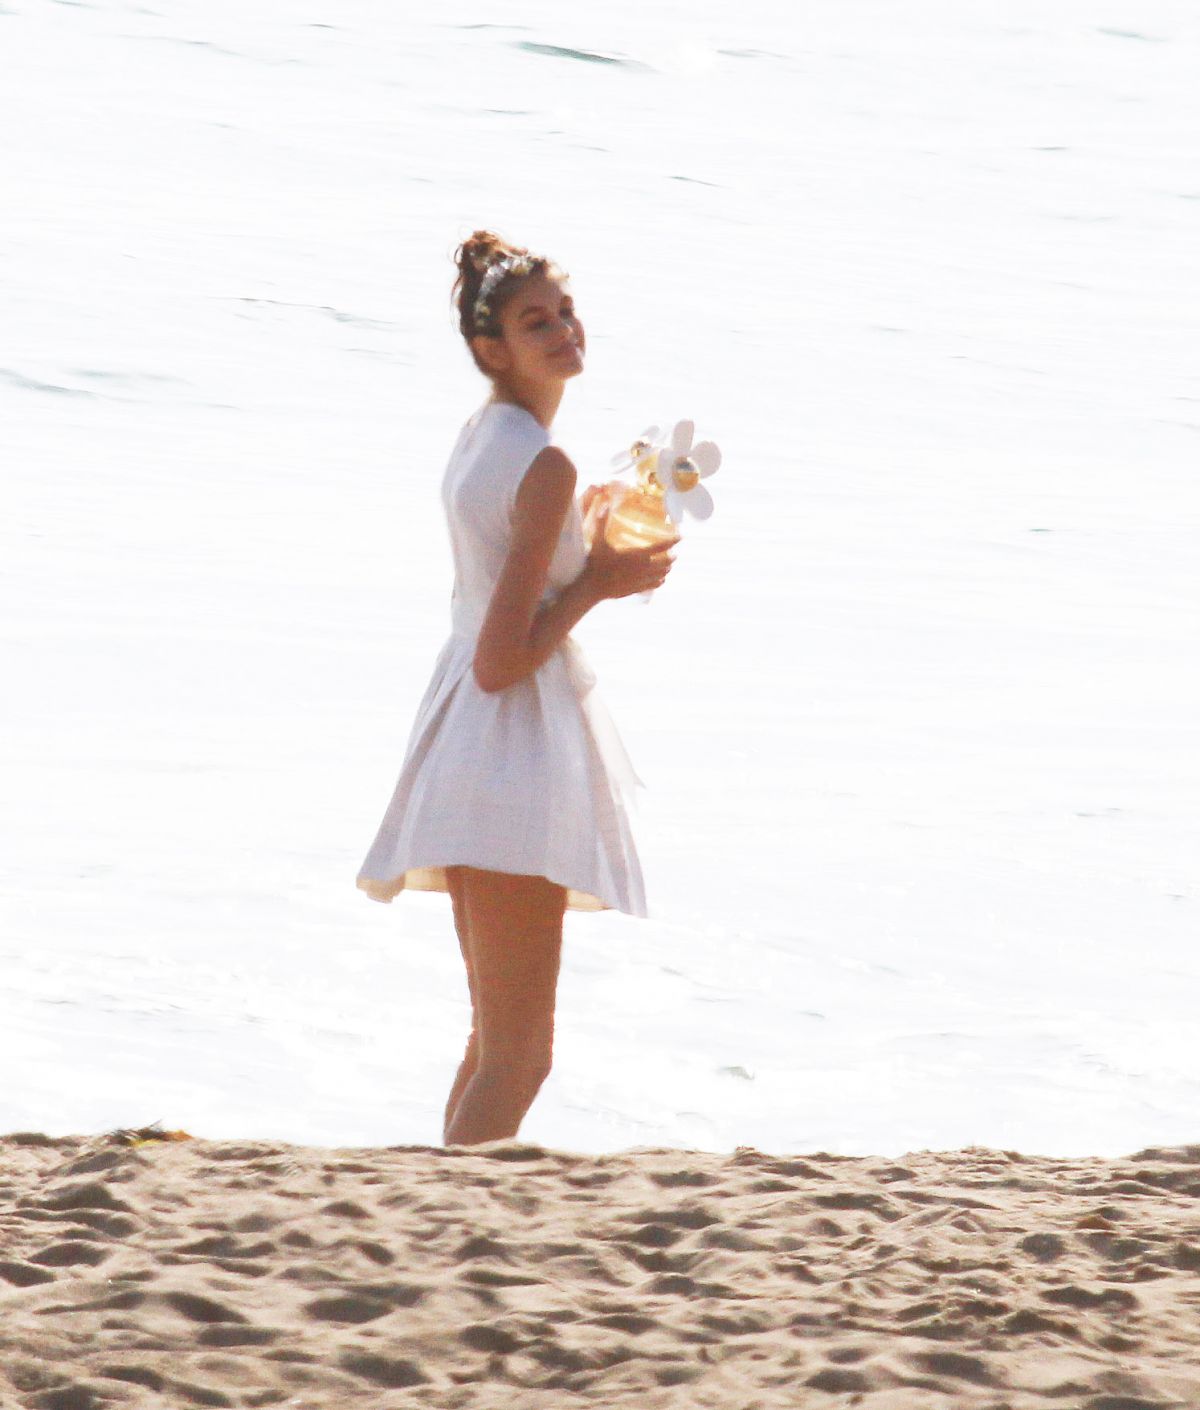 KAIA GERBER at a Photoshoot for Marc Jacobs Daisy Perfume in Malibu 05 ...